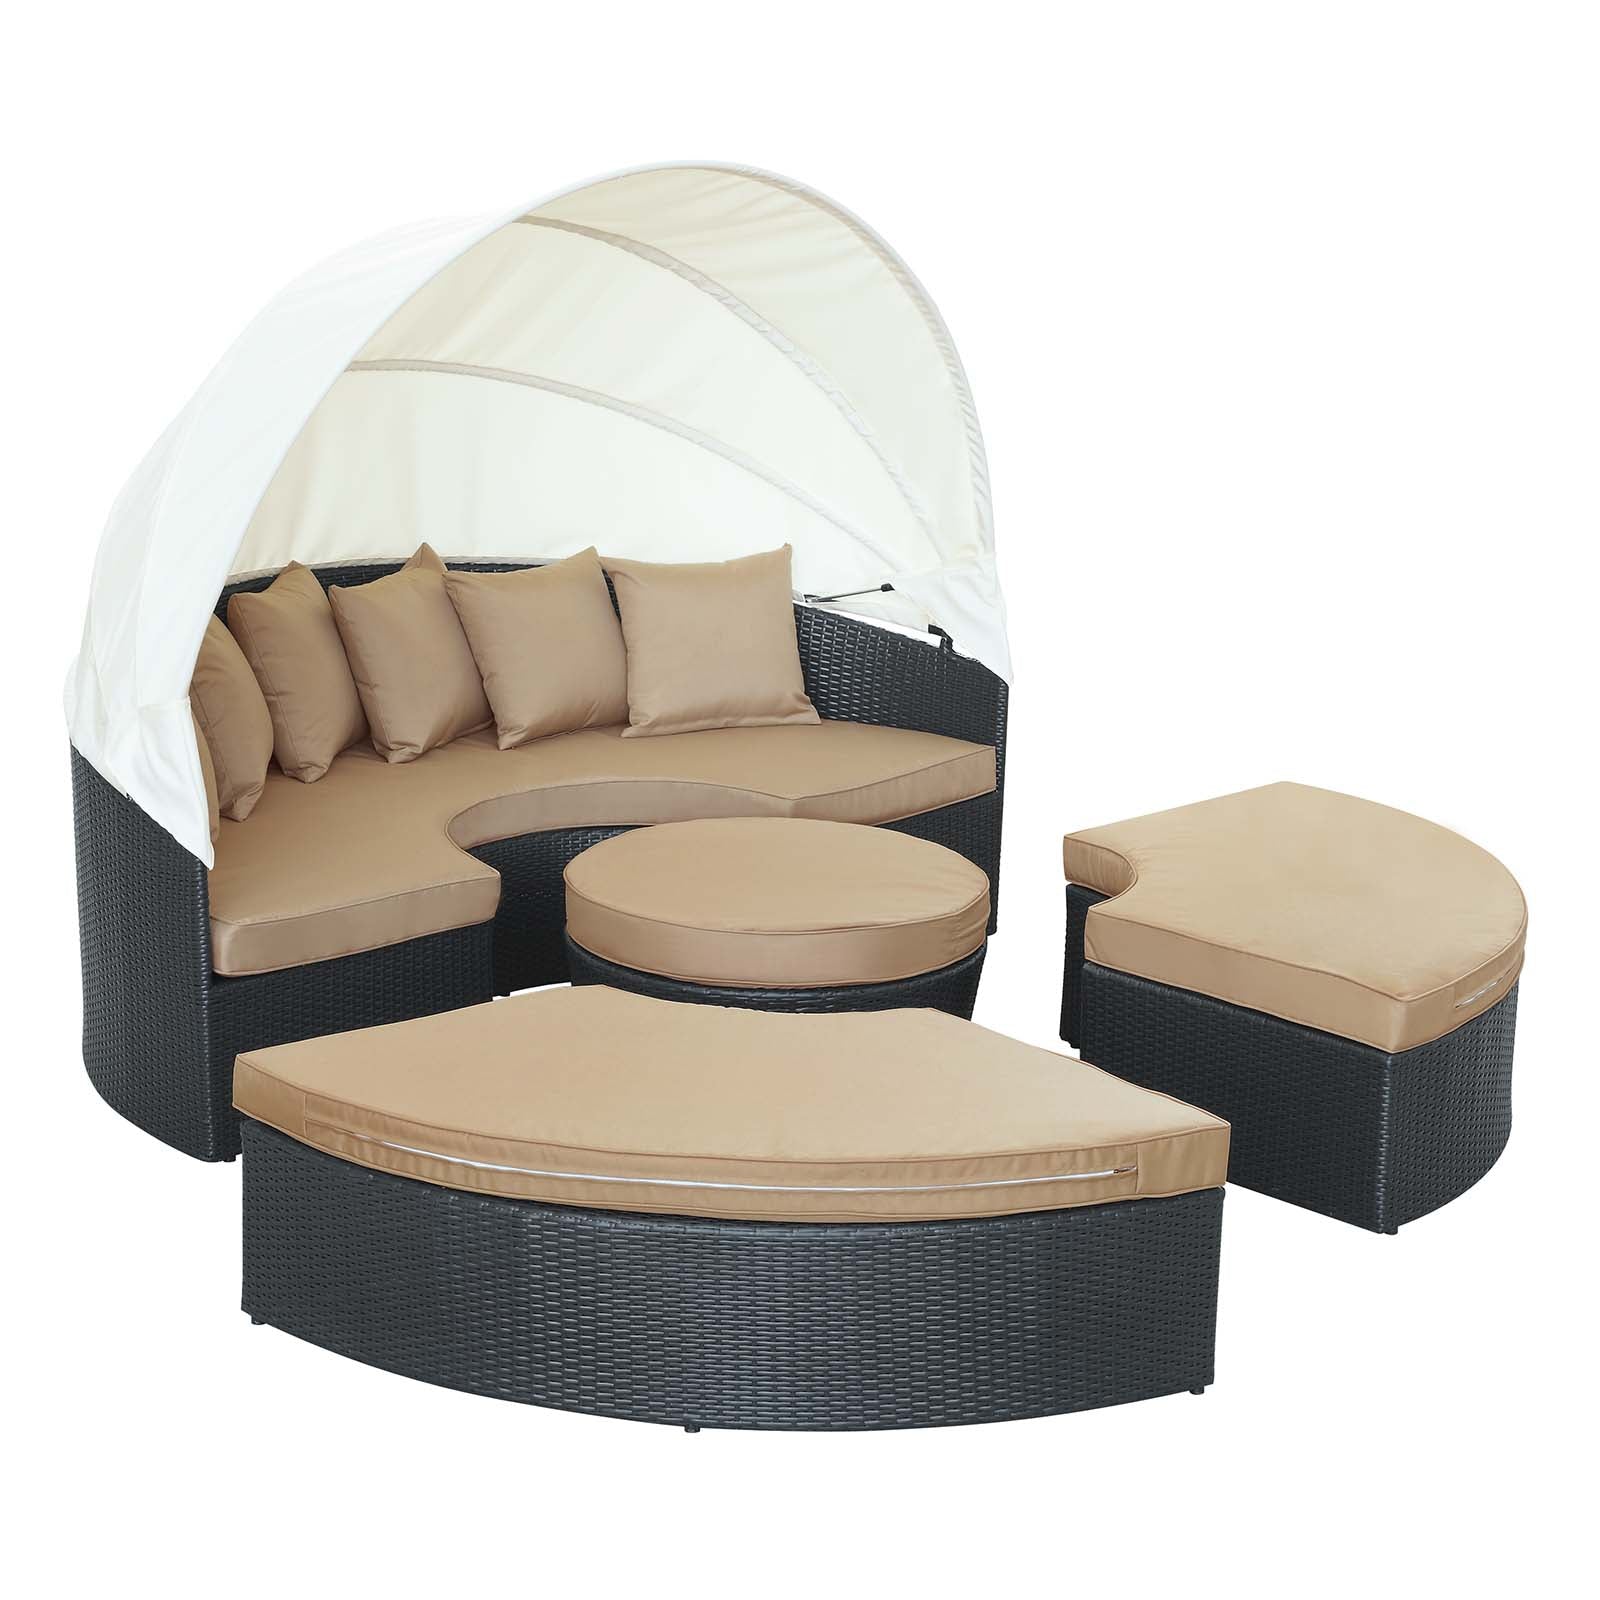 Modway Patio Daybeds - Quest Canopy Outdoor Patio 4 Piece Daybed Set Espresso & Mocha